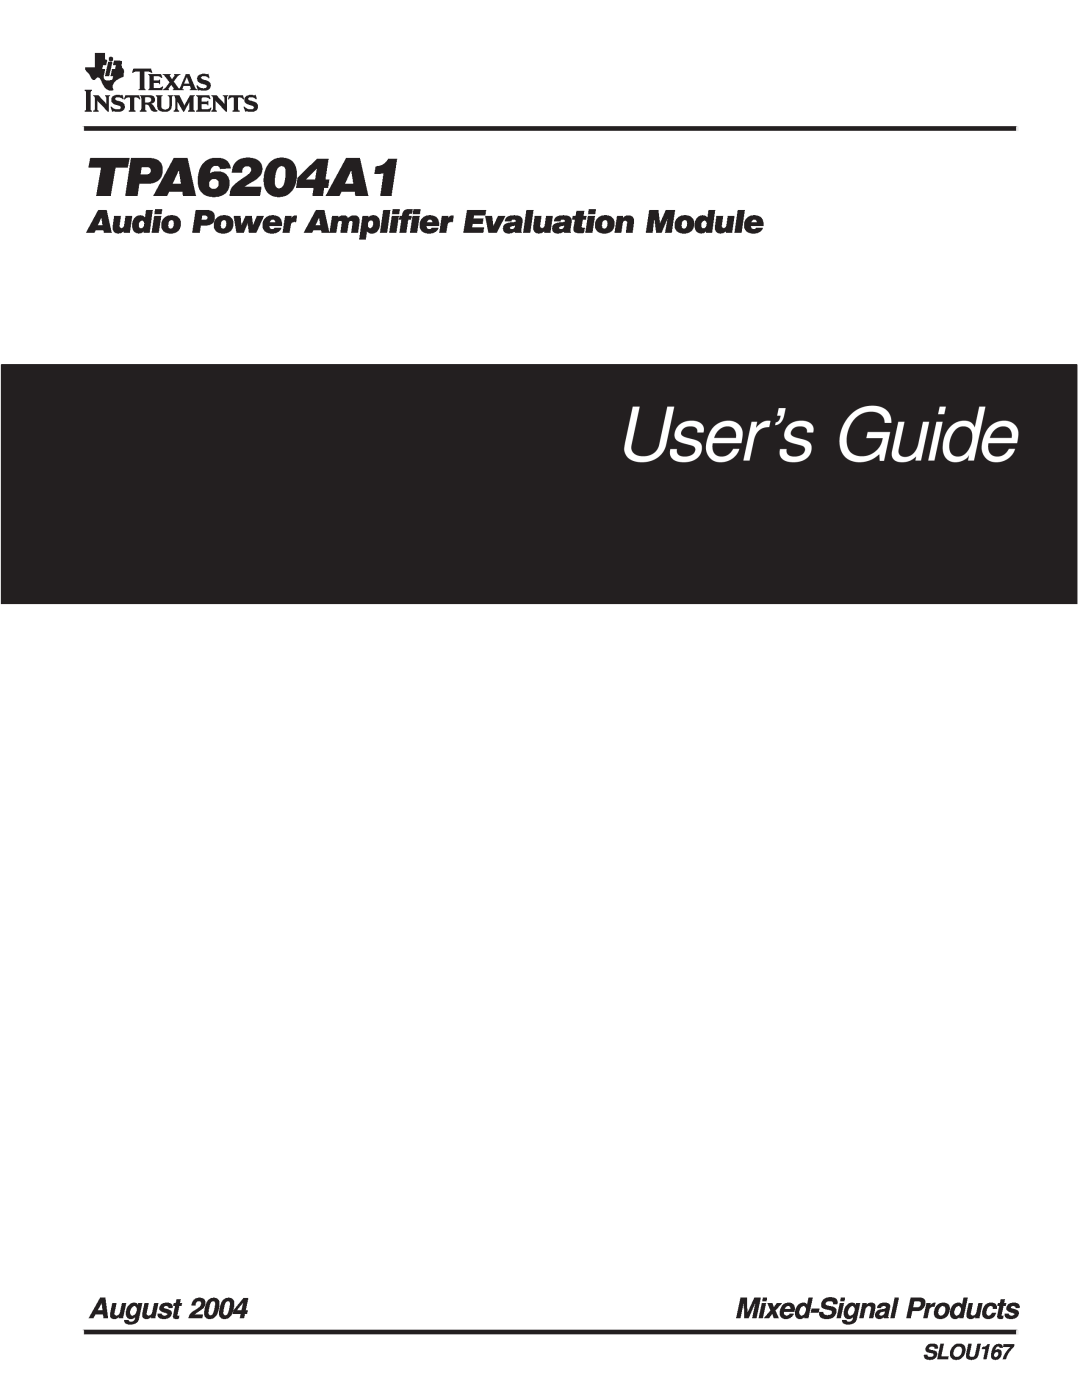 Texas Instruments TPA6204A1 manual User’s Guide, Audio Power Amplifier Evaluation Module, August, Mixed-SignalProducts 